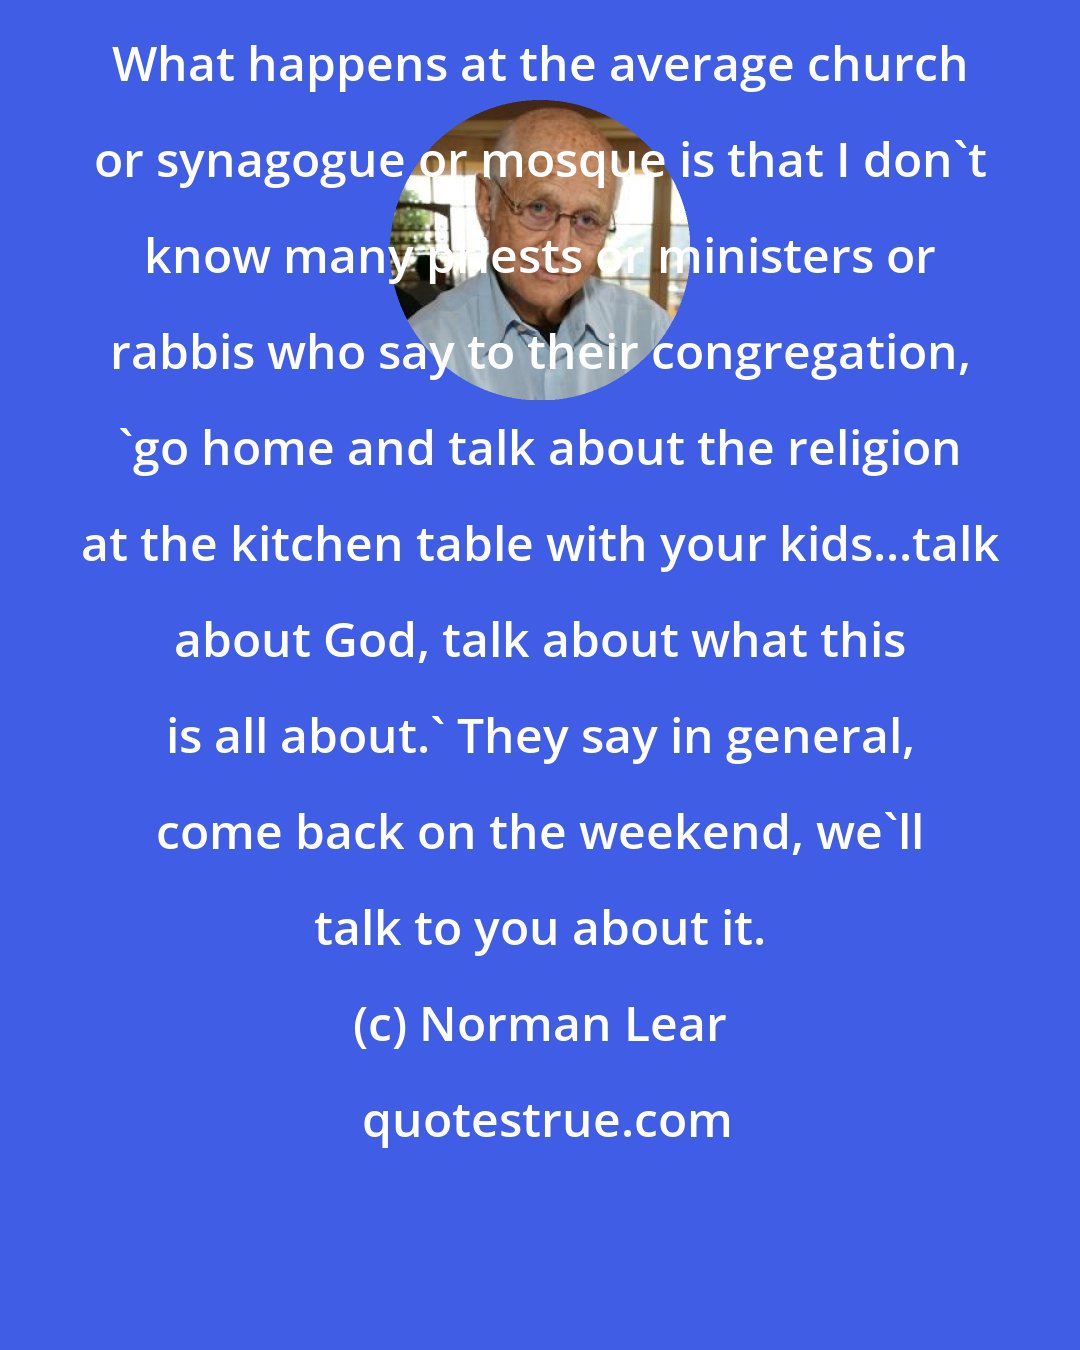 Norman Lear: What happens at the average church or synagogue or mosque is that I don't know many priests or ministers or rabbis who say to their congregation, 'go home and talk about the religion at the kitchen table with your kids...talk about God, talk about what this is all about.' They say in general, come back on the weekend, we'll talk to you about it.